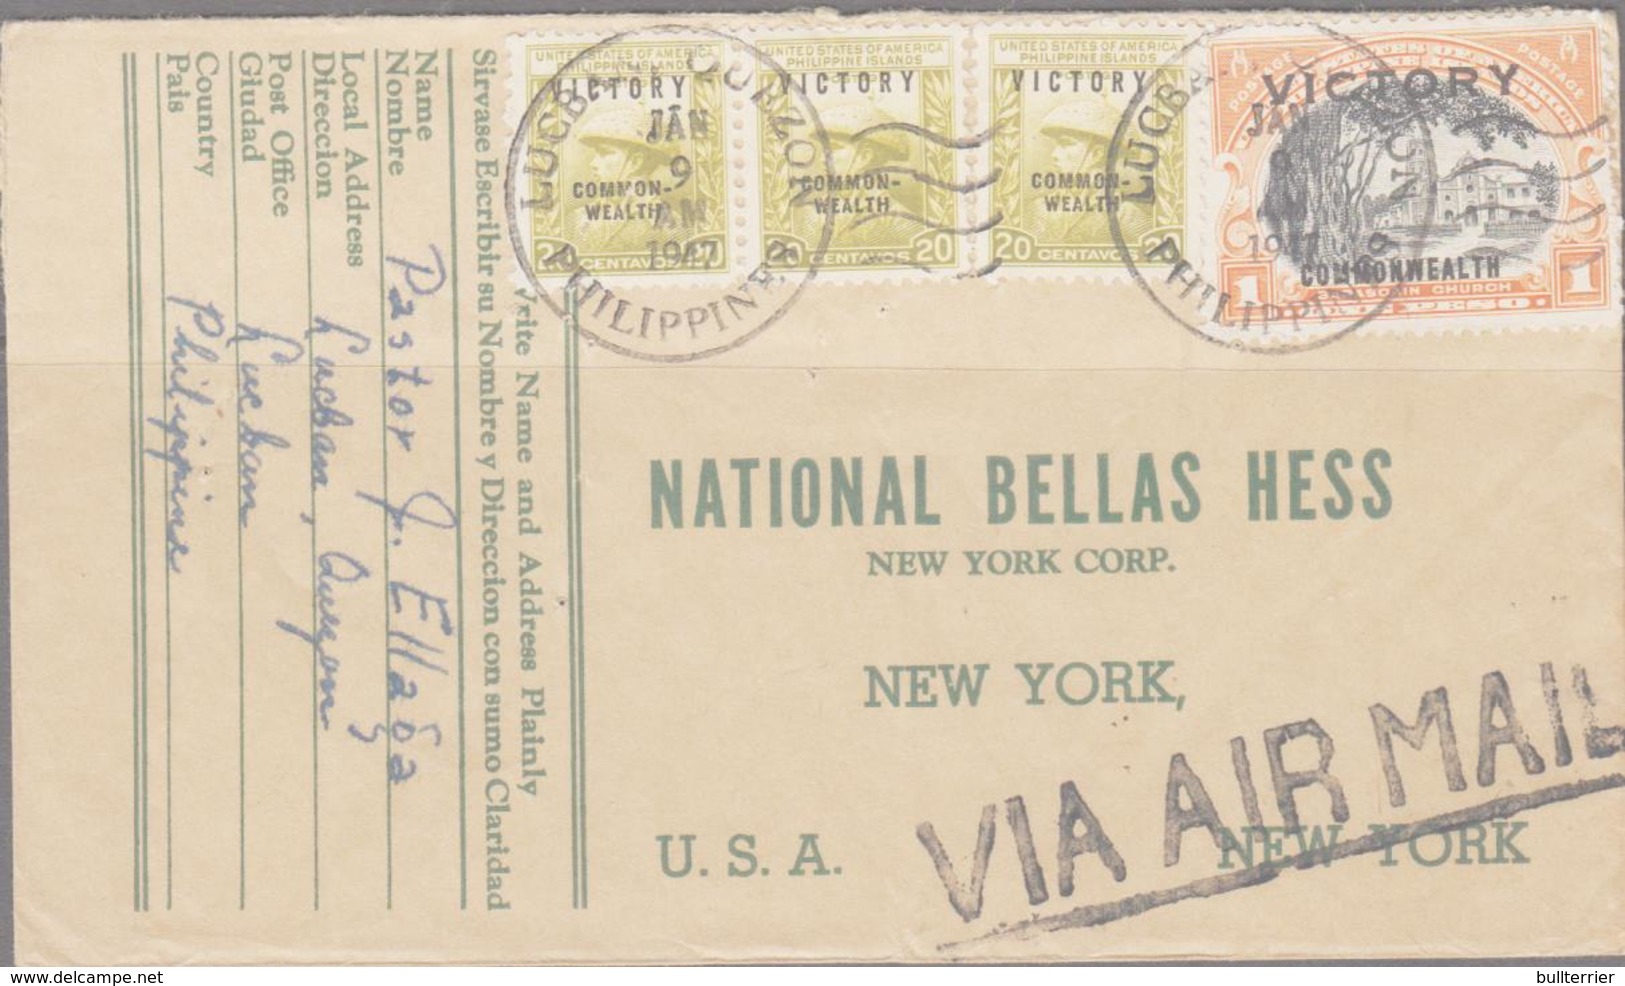 PHILIPPINES  -1947 - VICTORY OVERPRNTS ON  AIRMAIL COVER  TO NEW YORK - Philippines